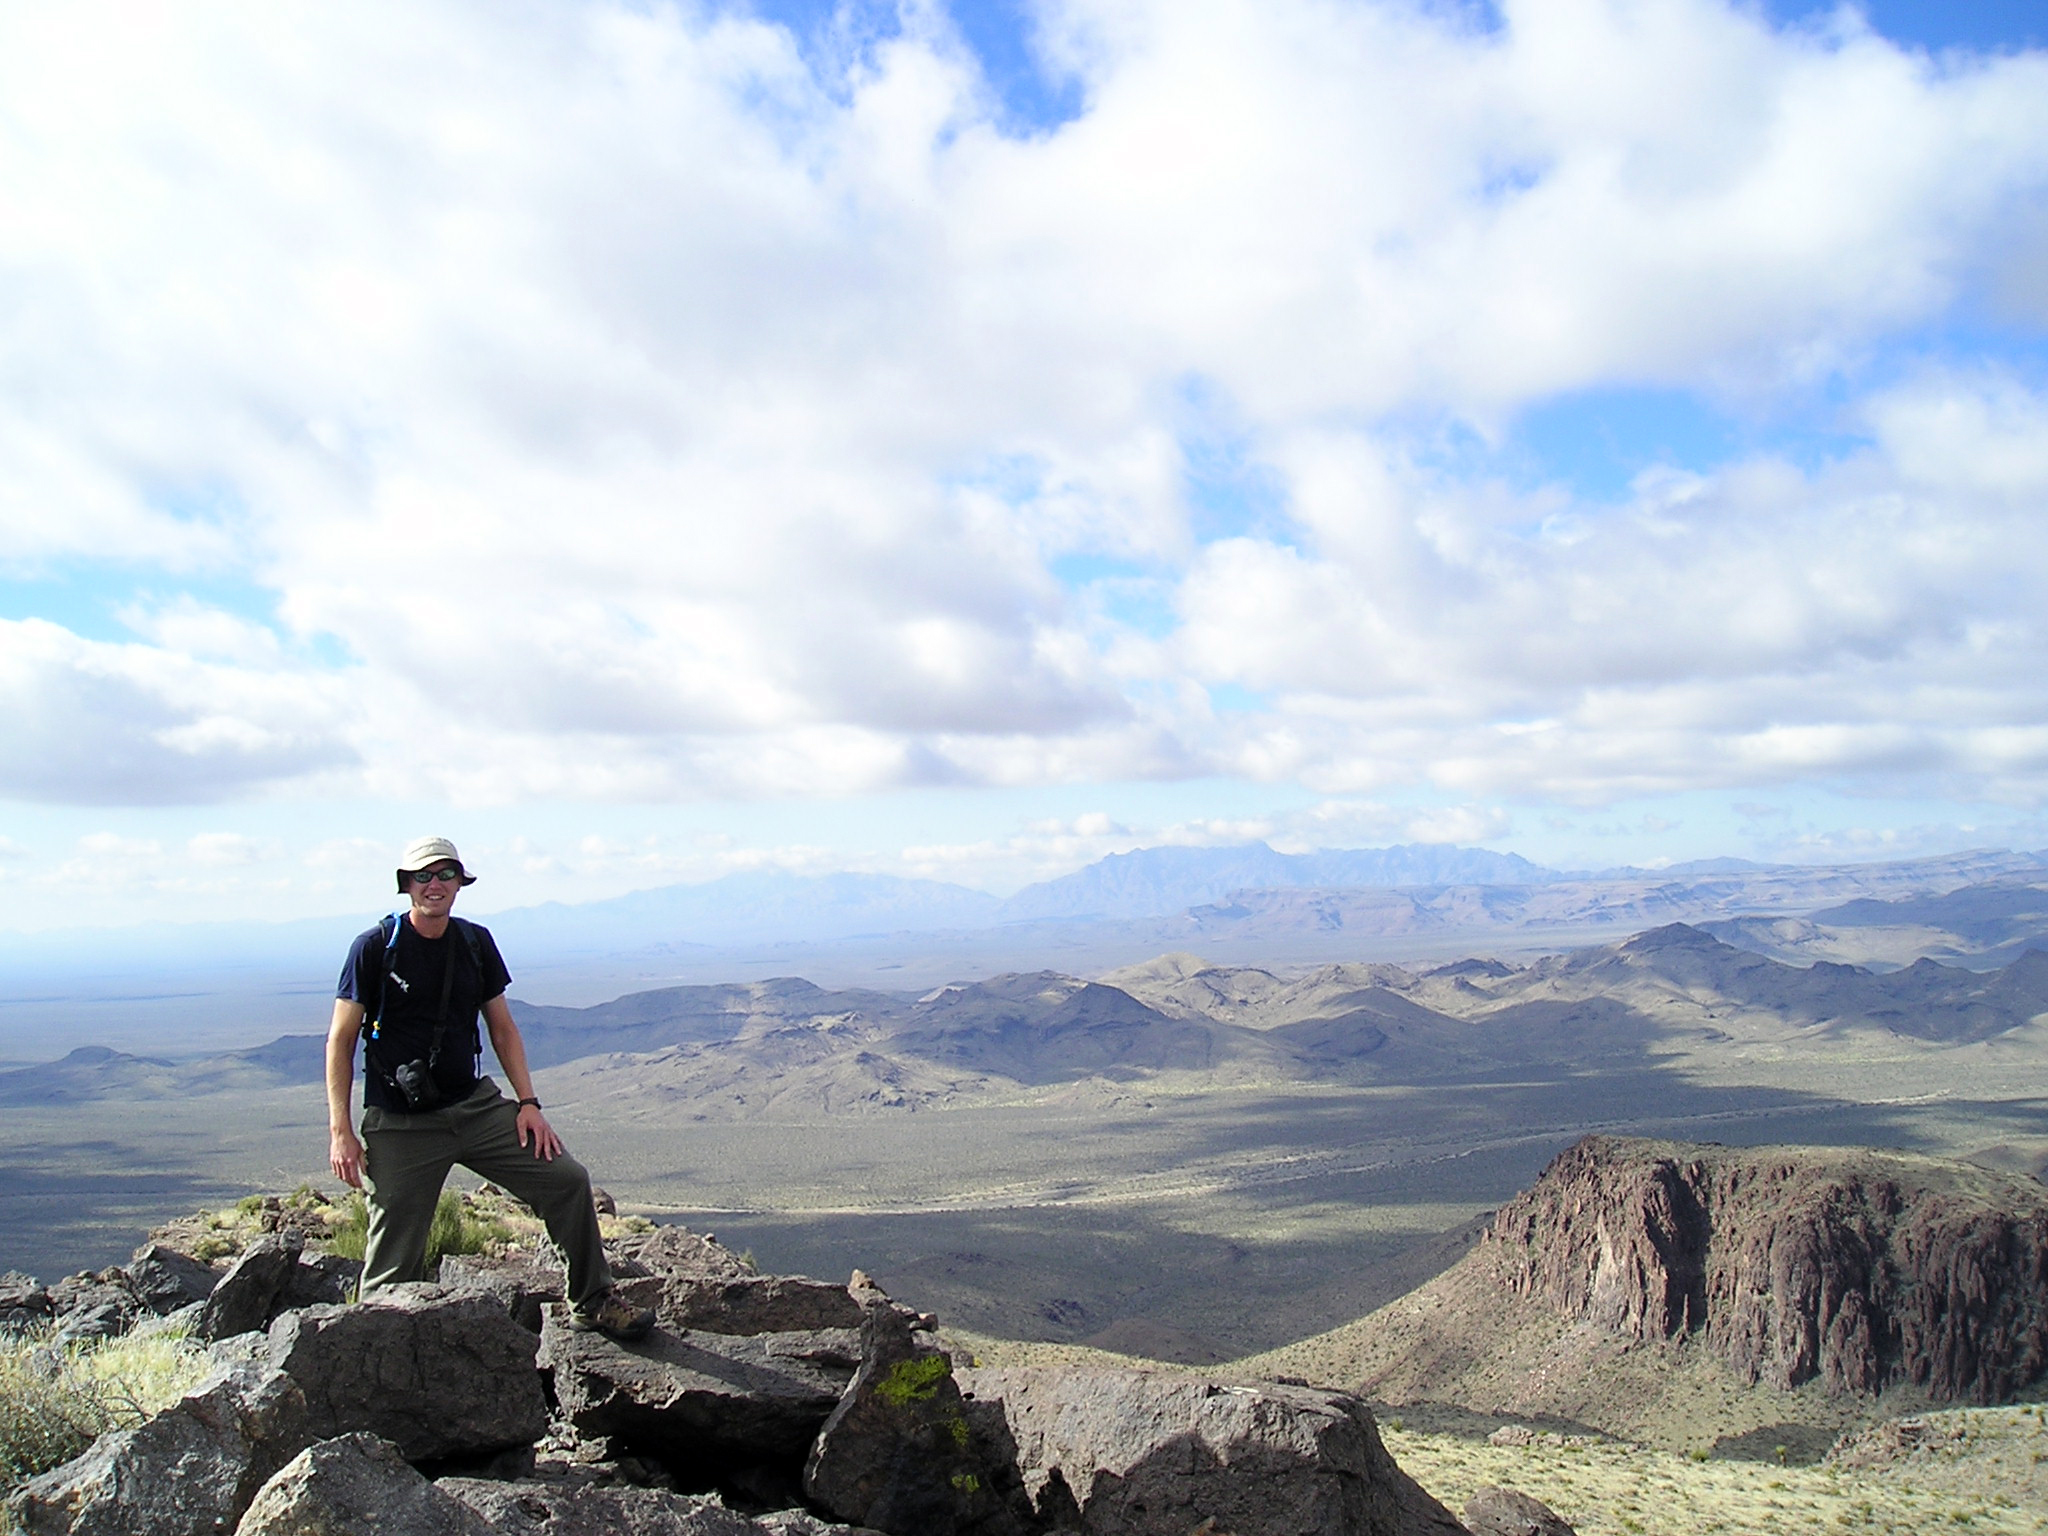 A man standing on a mountain peak in front of a wide desert landscape